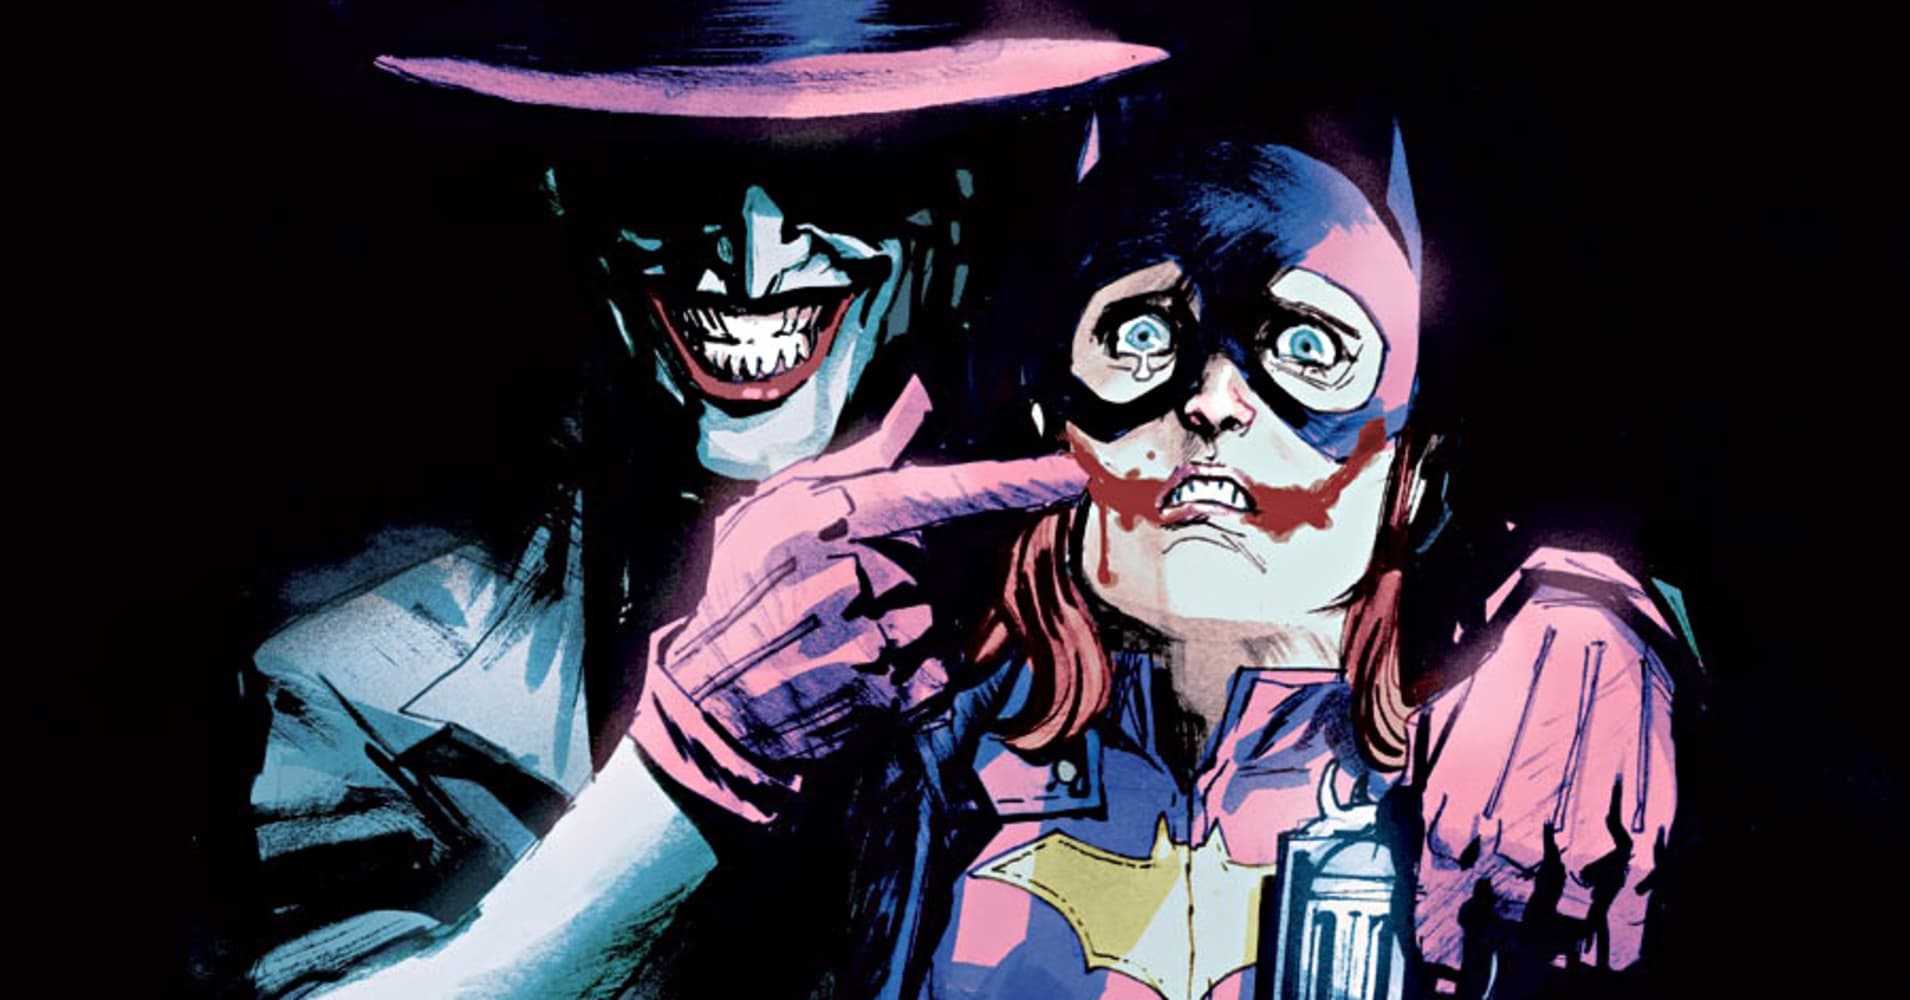 Dc S Batgirl Triggers Unlikely Furor Over Sexism Censorship